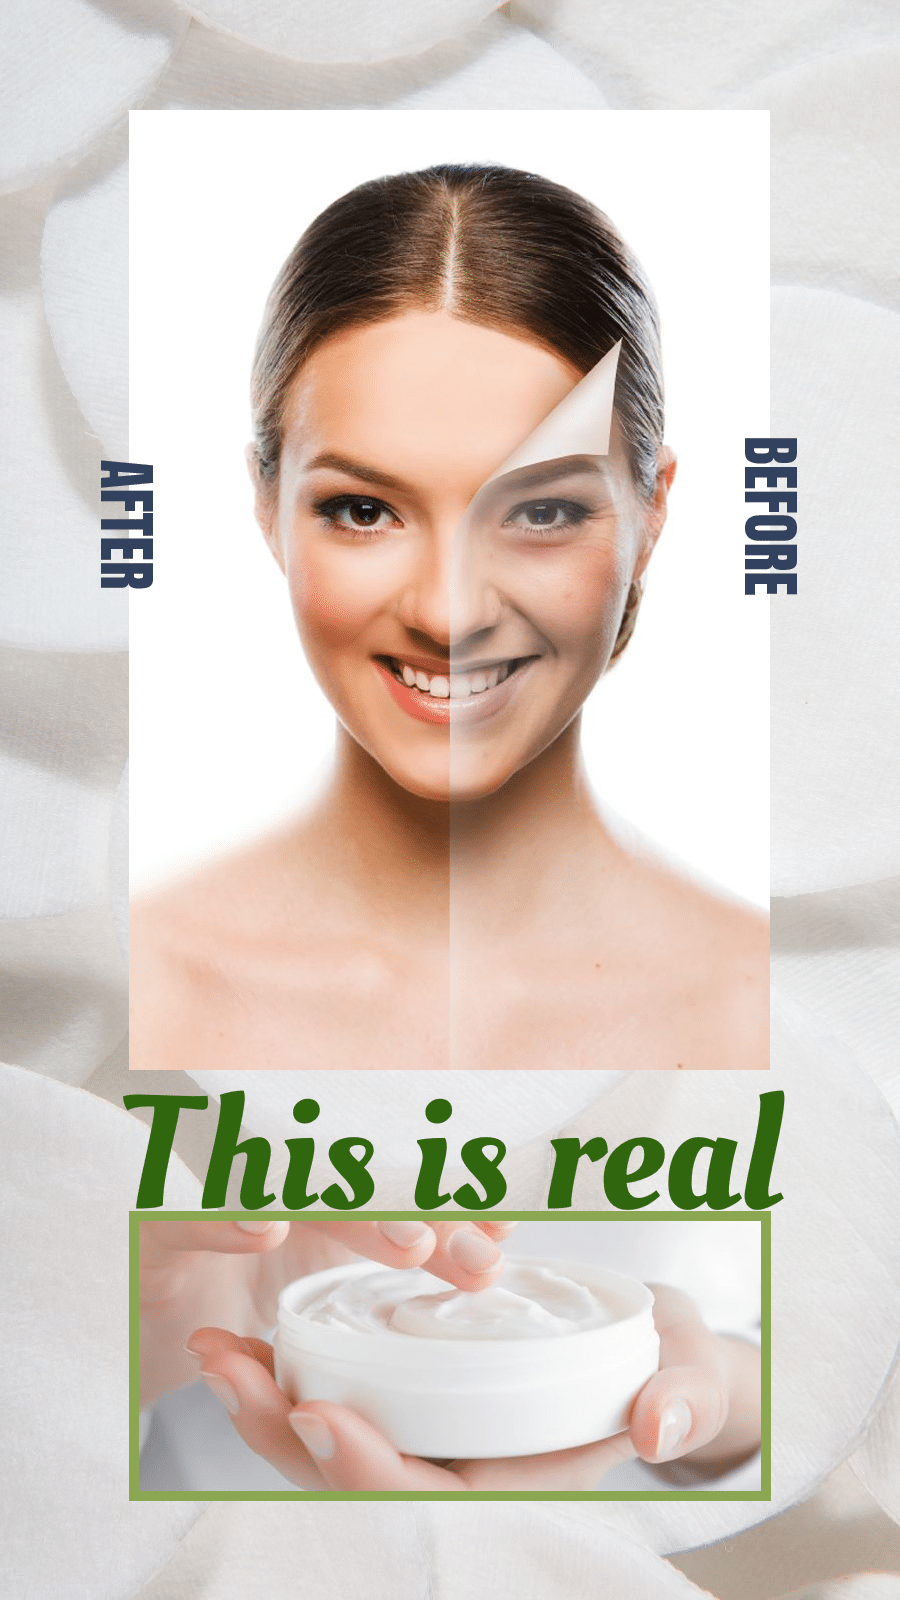 Facial Cream Beauty Skincare Product Before and After Comparison Ecommerce Story